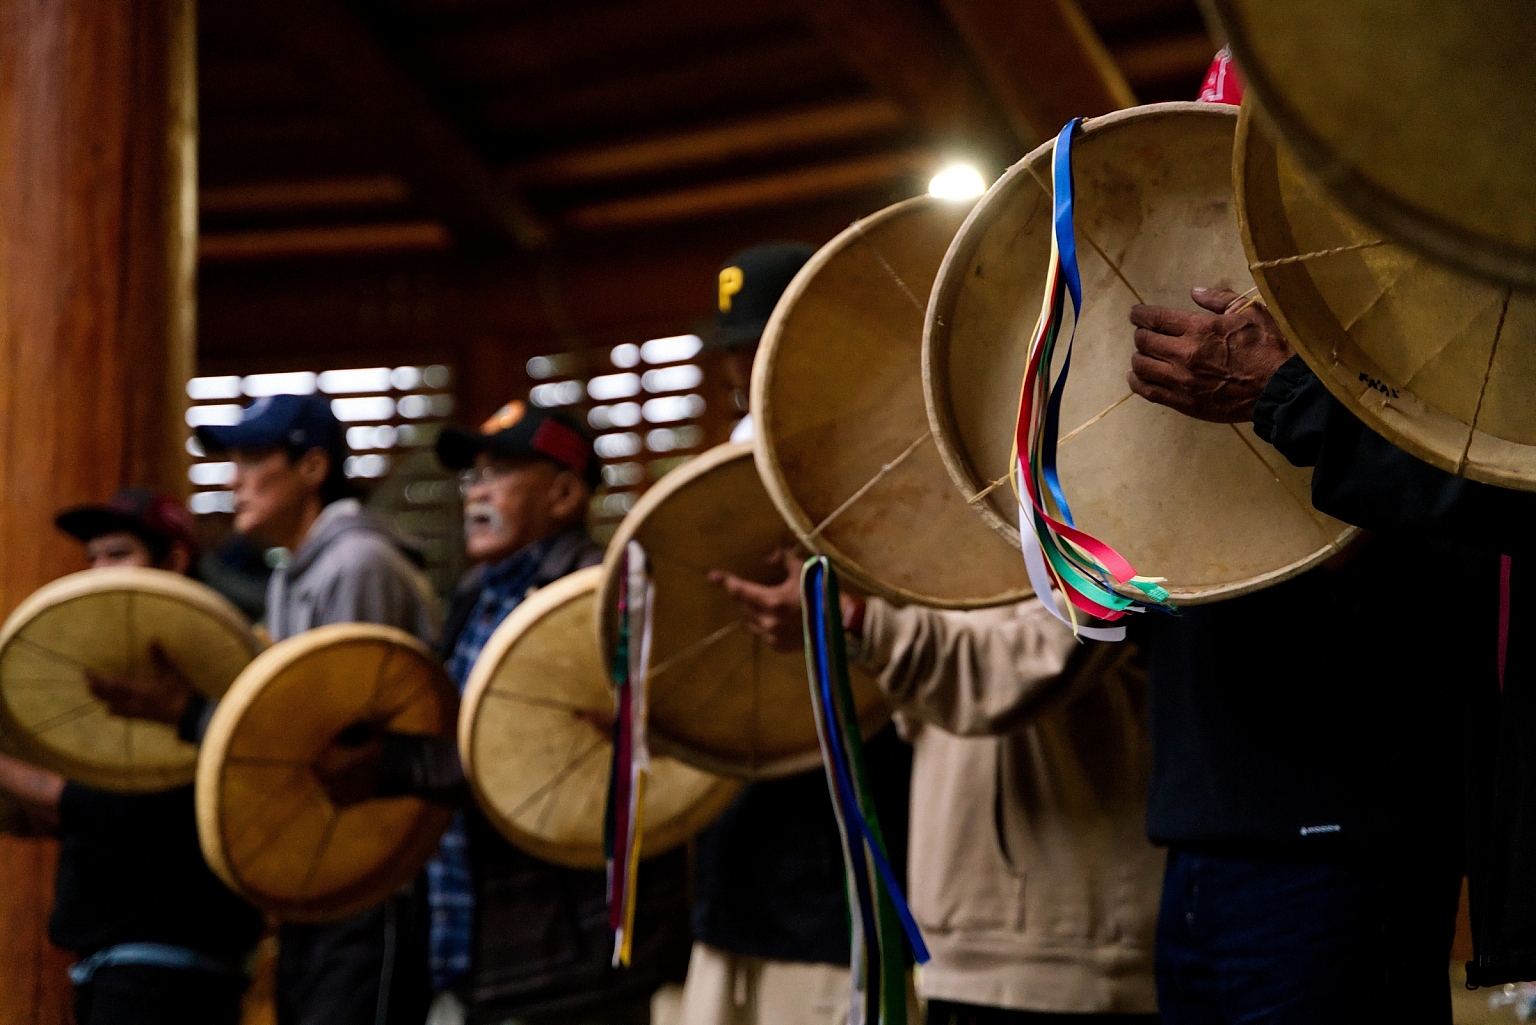 A group of Indigenous people drum at the Traditional Dene Drum Dance.